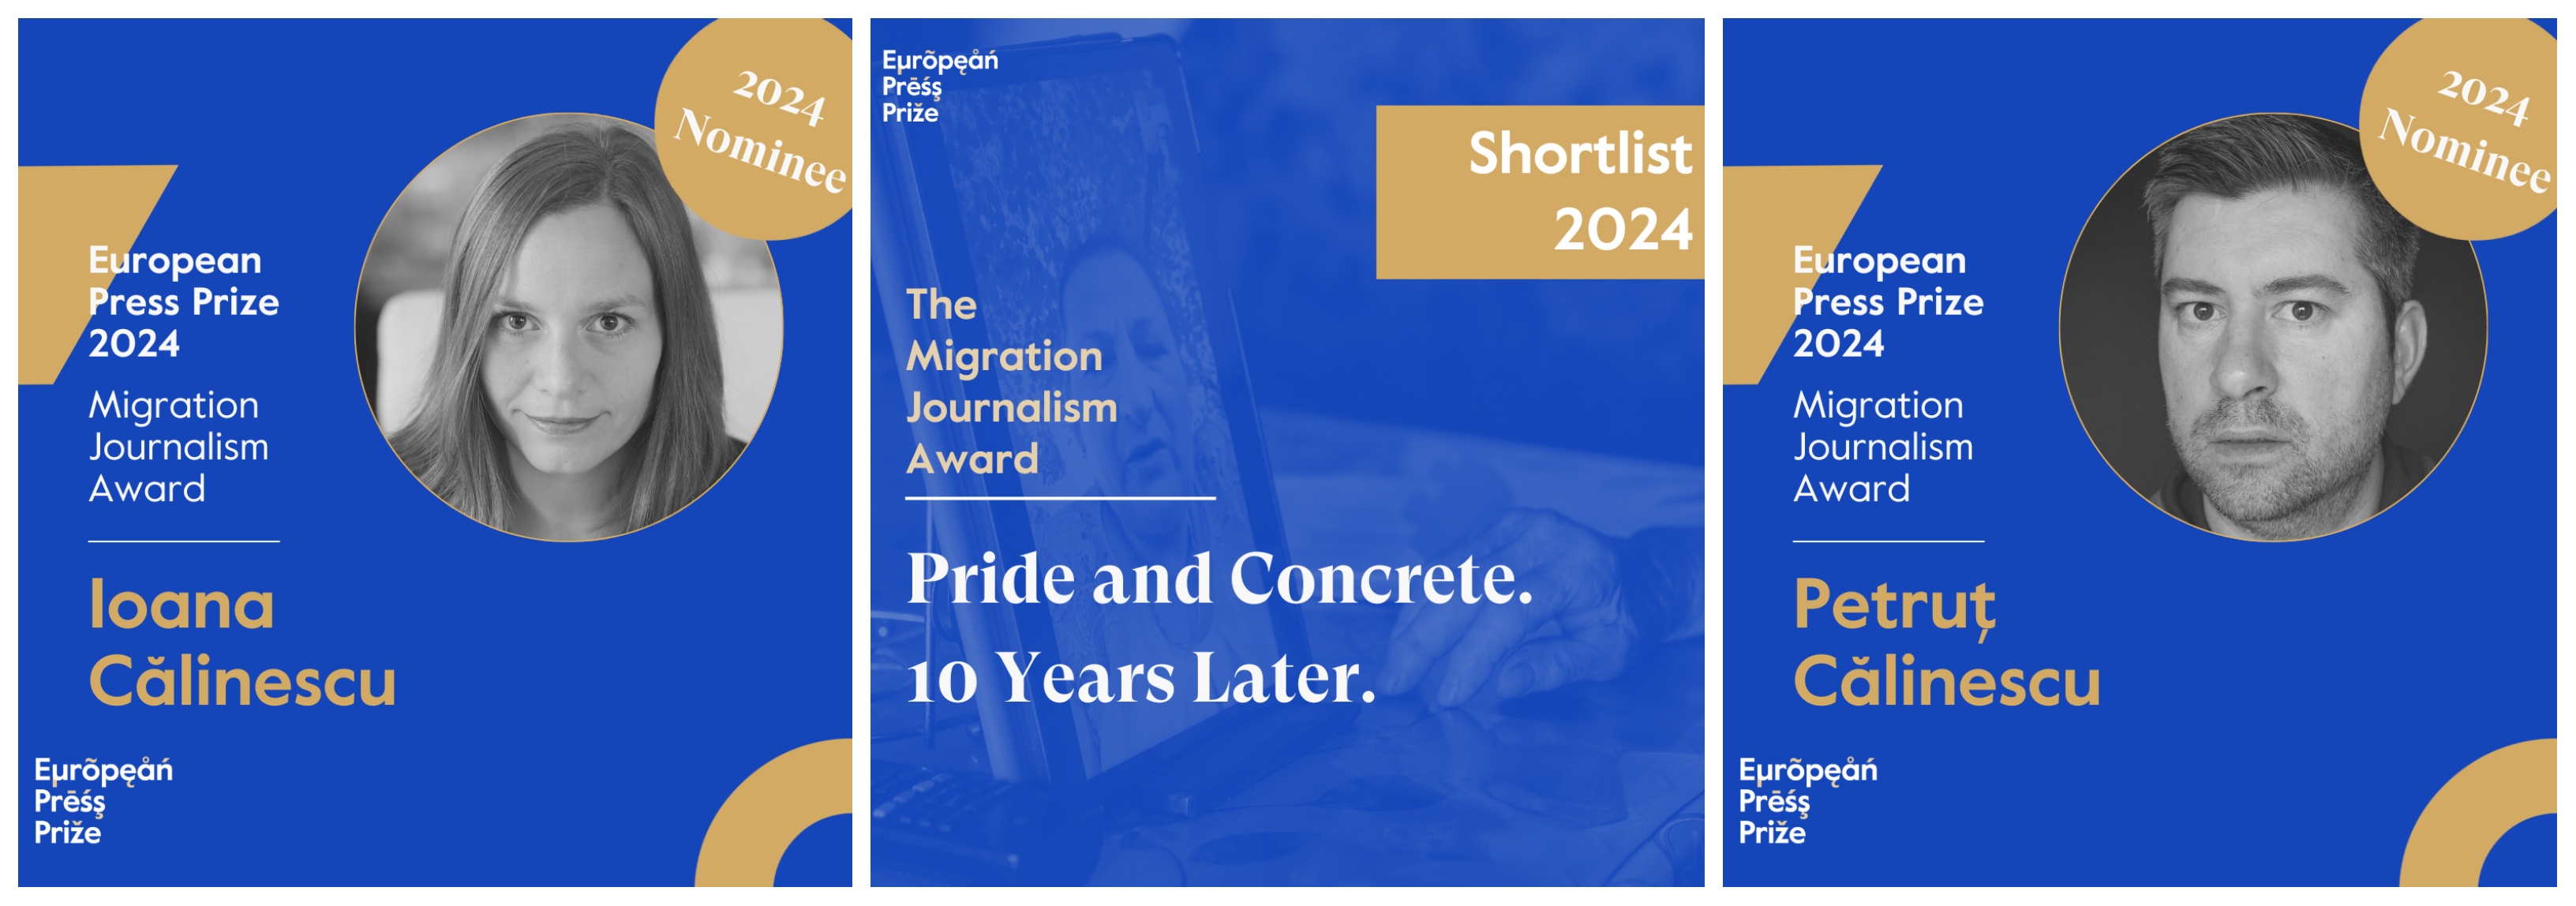 Romanian web documentary “Pride and Concrete. After 10 Years” nominated for the European Press Prize